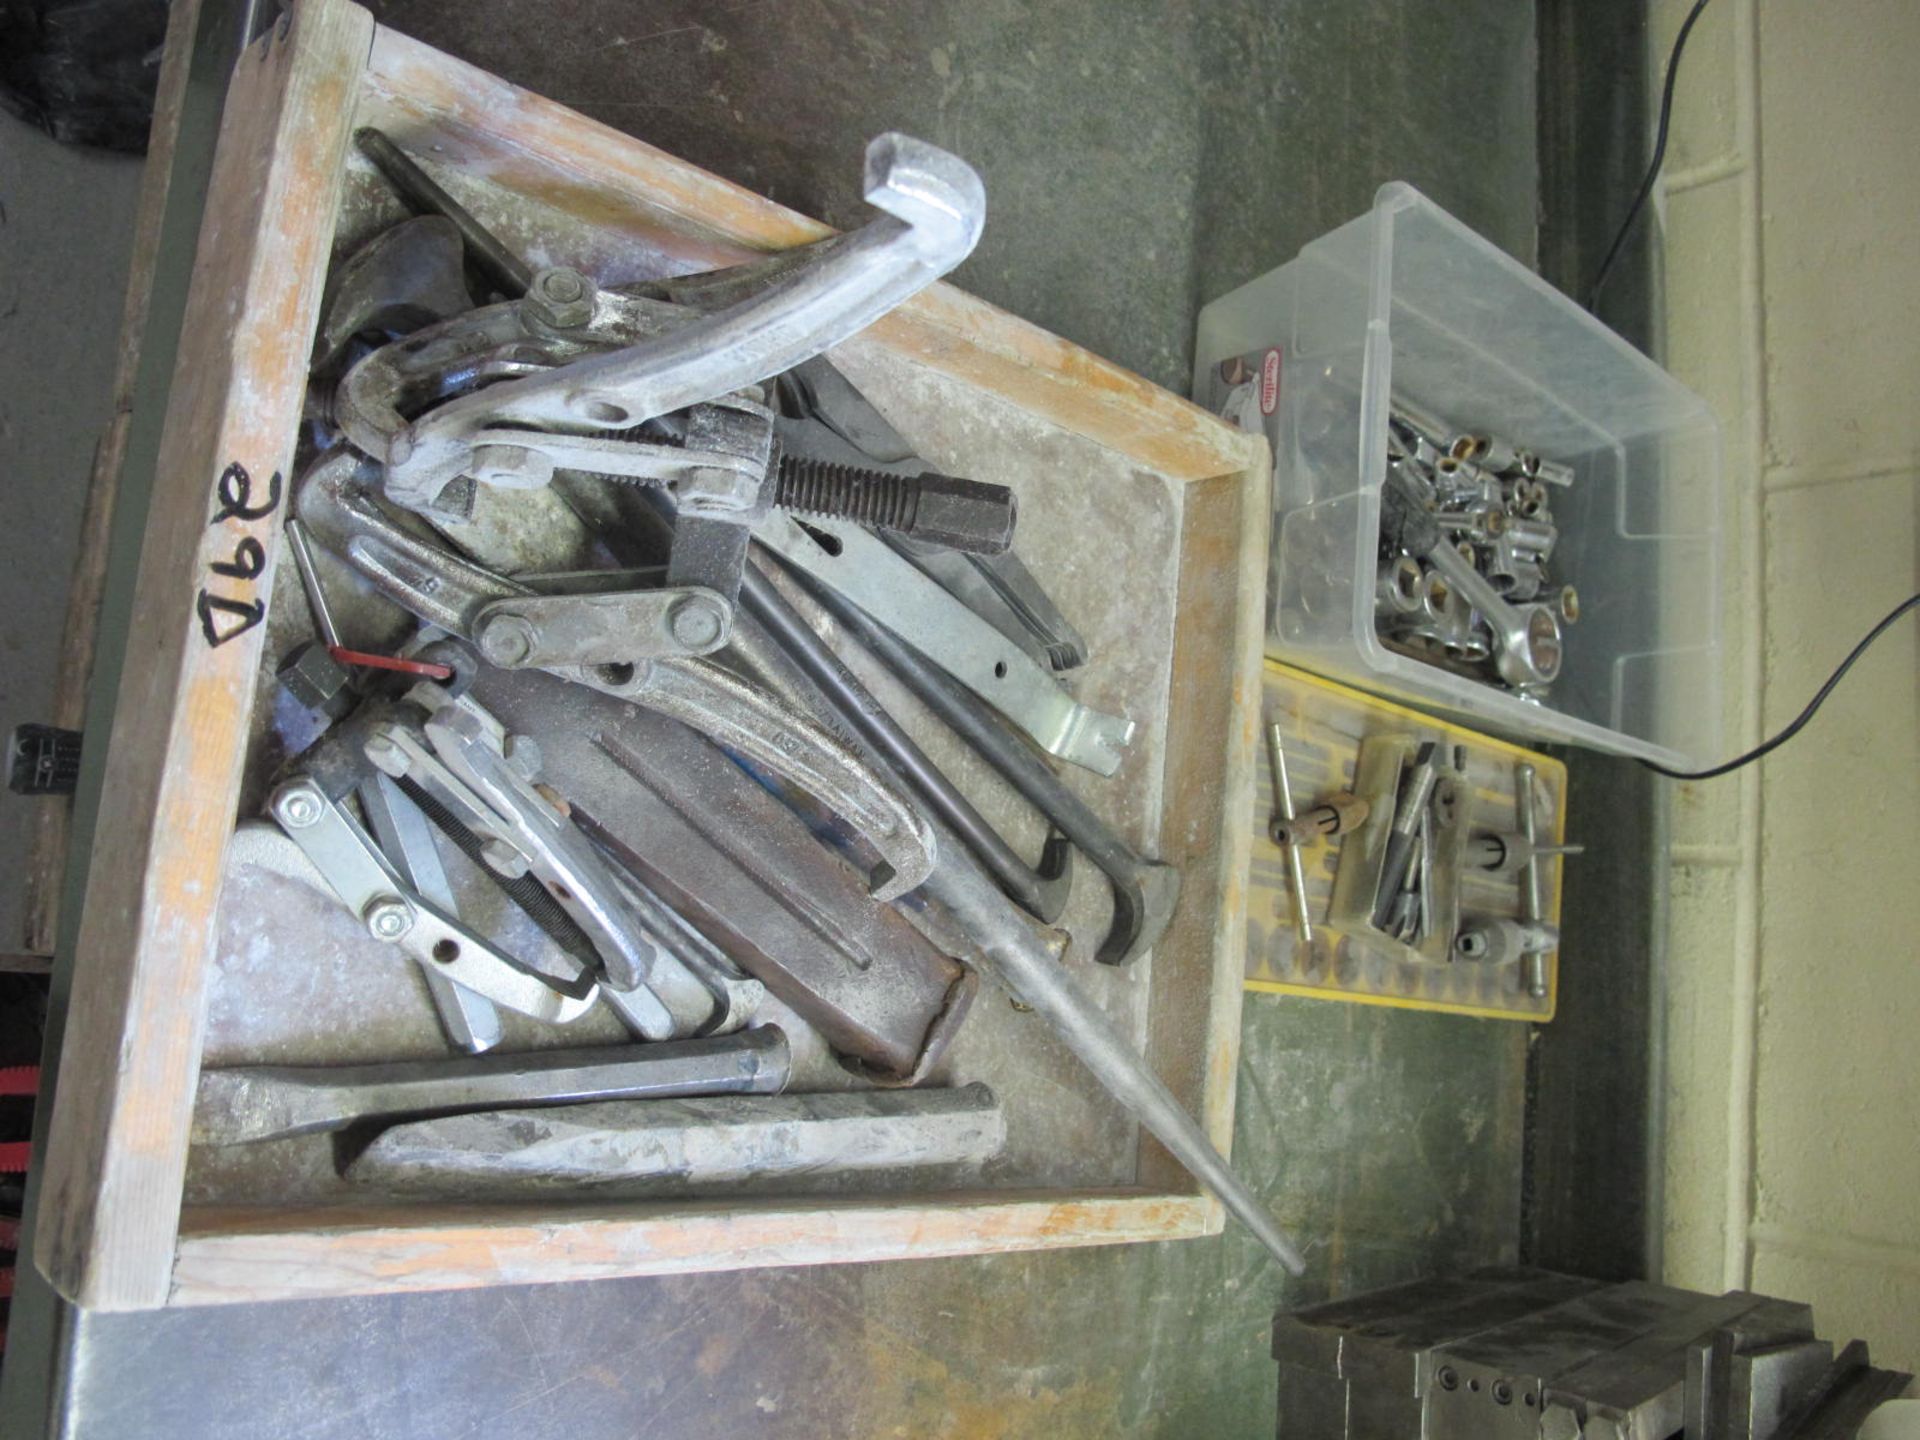 Lot Tools. Wheel Puller, Chisels